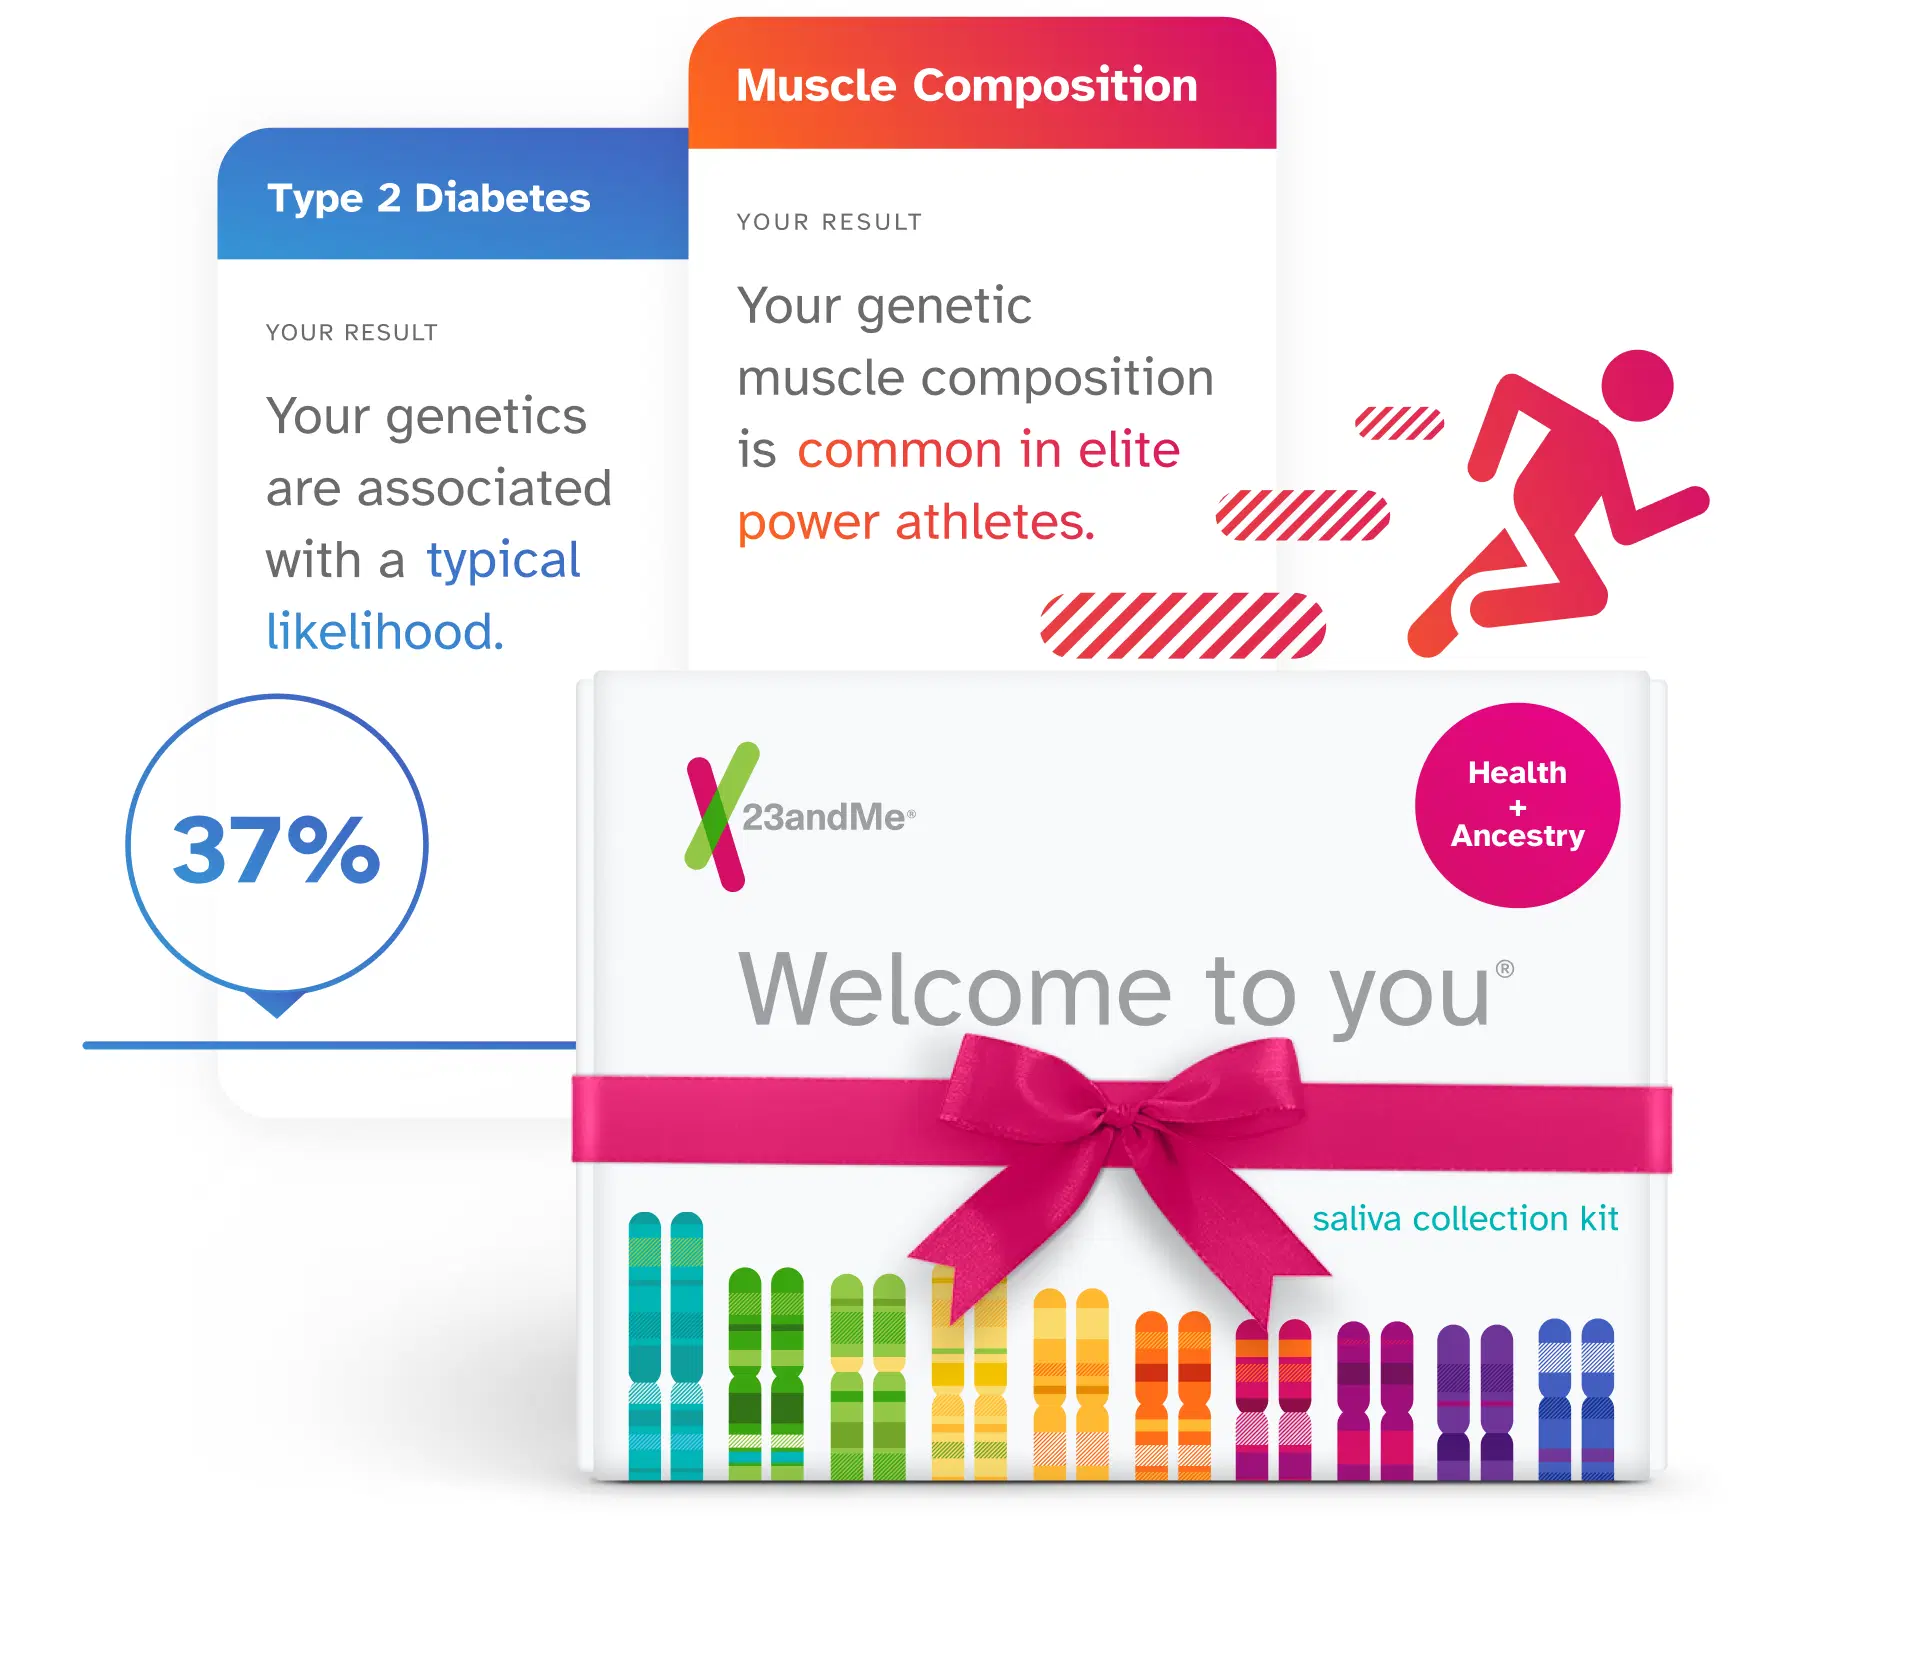 23andMe Health plus Ancestry saliva collection Kit with example reports Type 2 Diabetes and Muscle Composition. Type 2 Diabetes report displays your example result: Your genetics are associated with a typical likelihood. Muscle Composition report displays your example result: Your genetic muscle composition is common in elite power athletes.